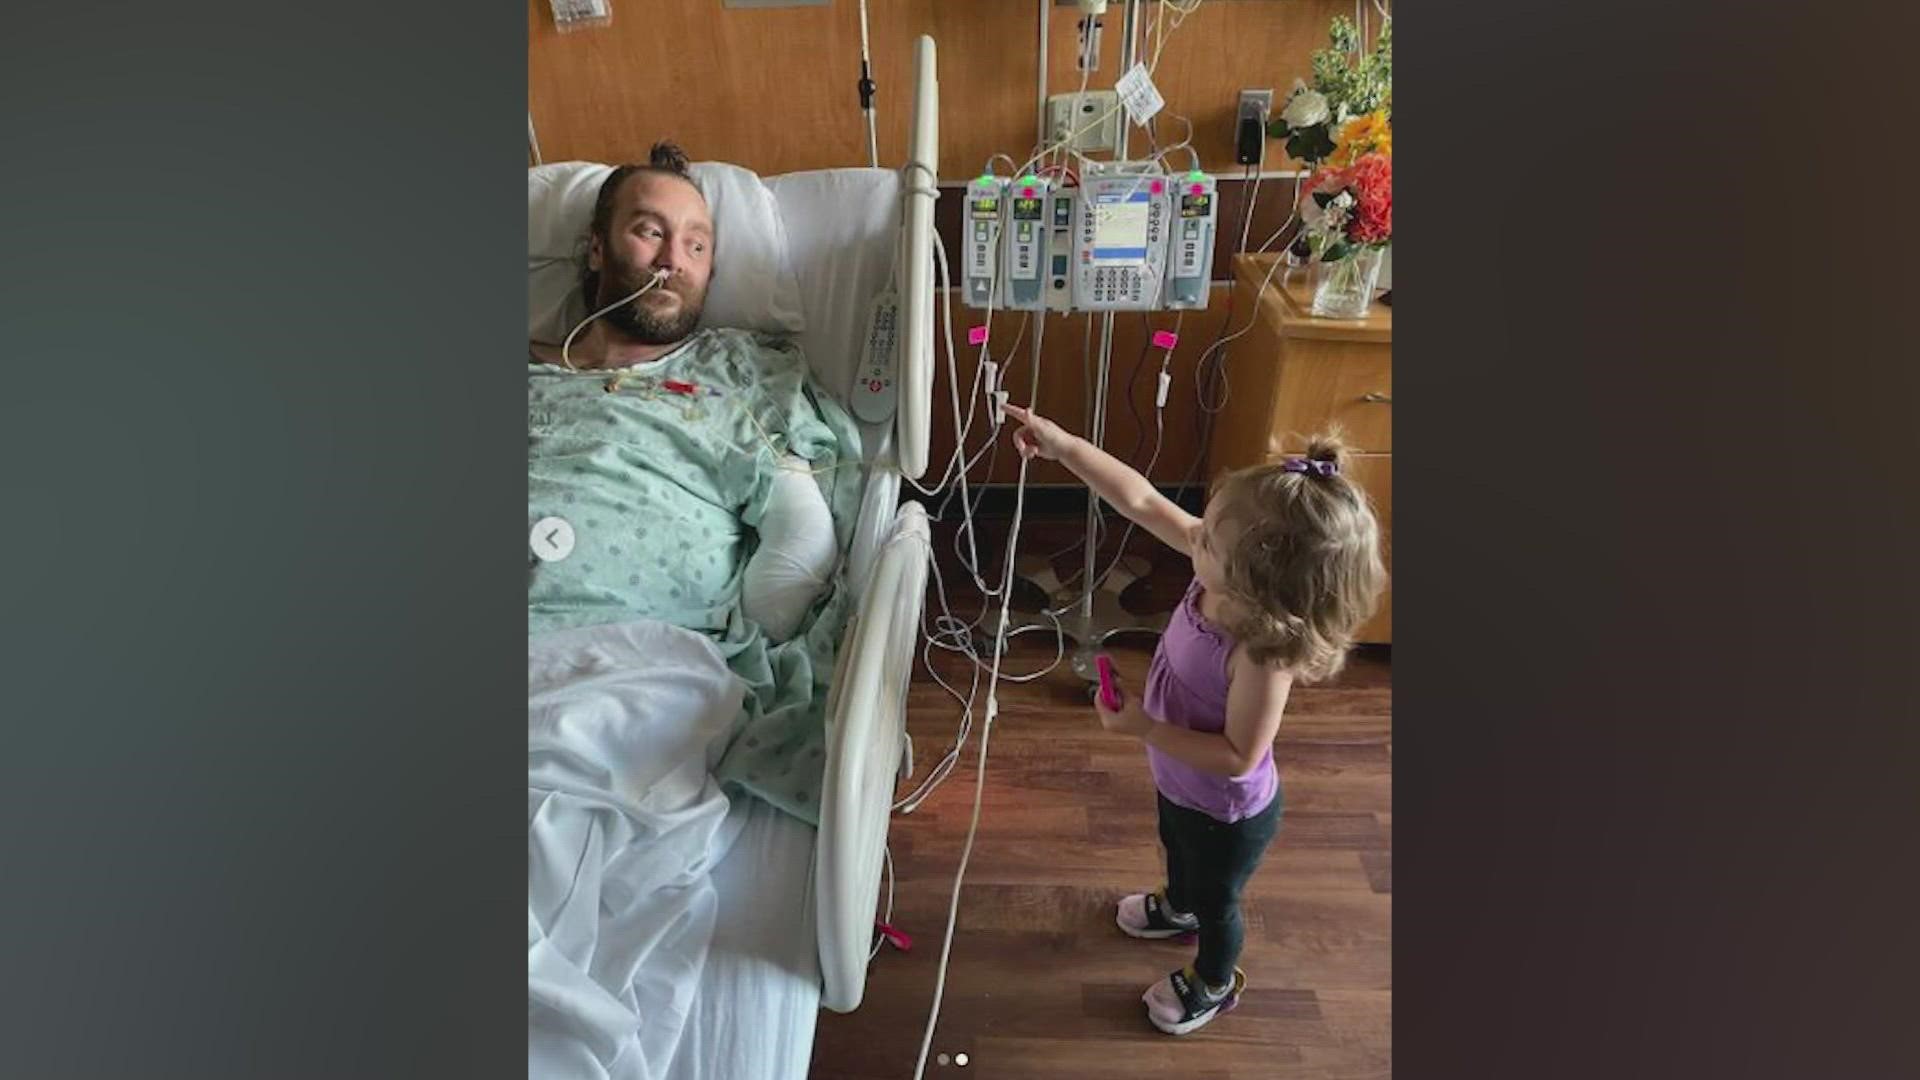 Musician and sound engineer Jeff Saenz lost his left hand and the majority of his right arm following a downed power line incident in June.